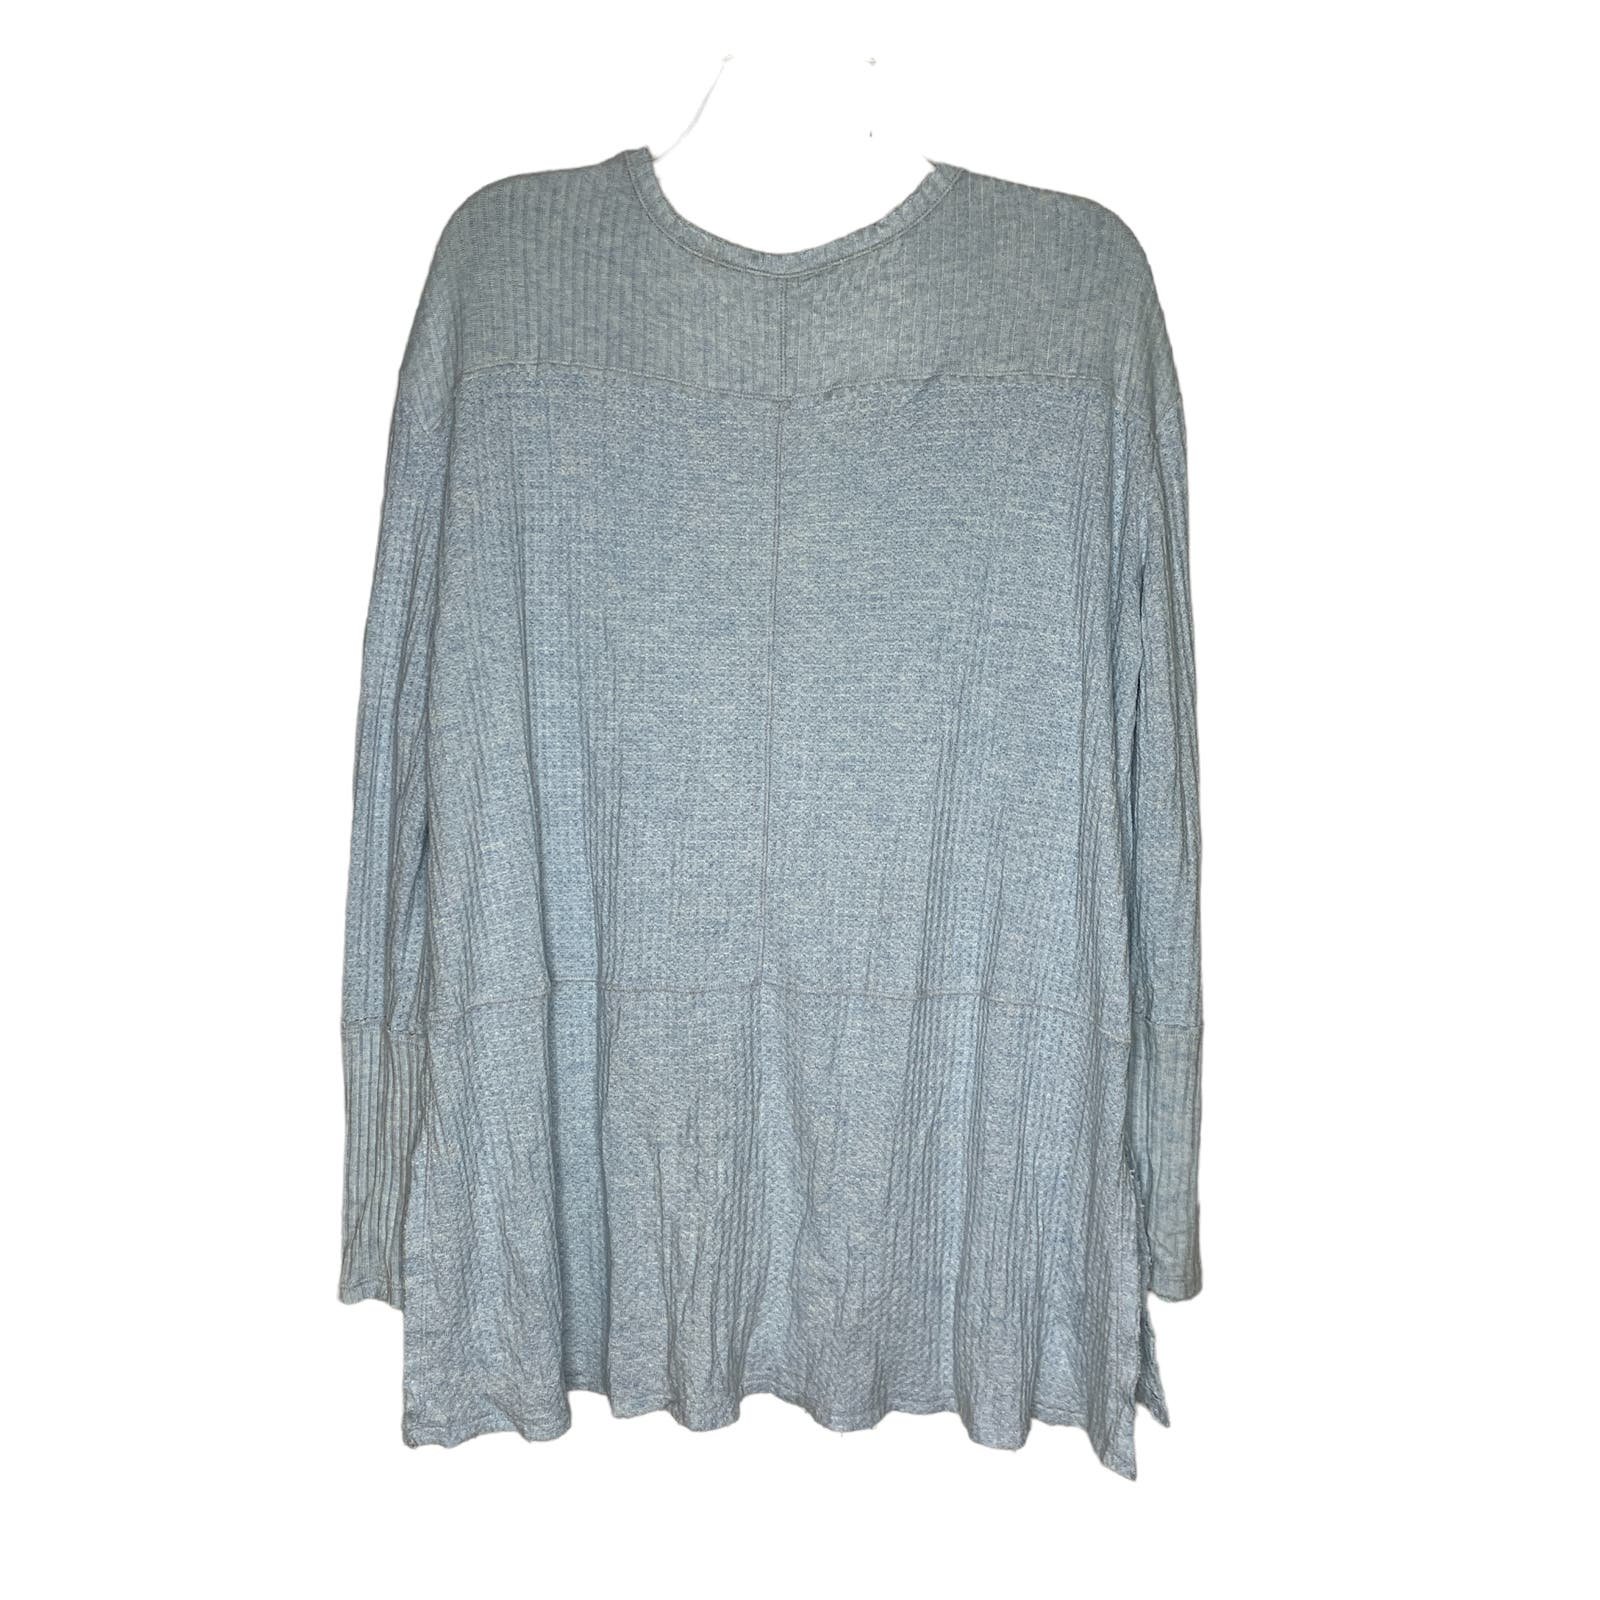 Classic Free People Blue Waffle Knit Tunic Top Shirt Small Oversized GPUw3Px4Q best sale